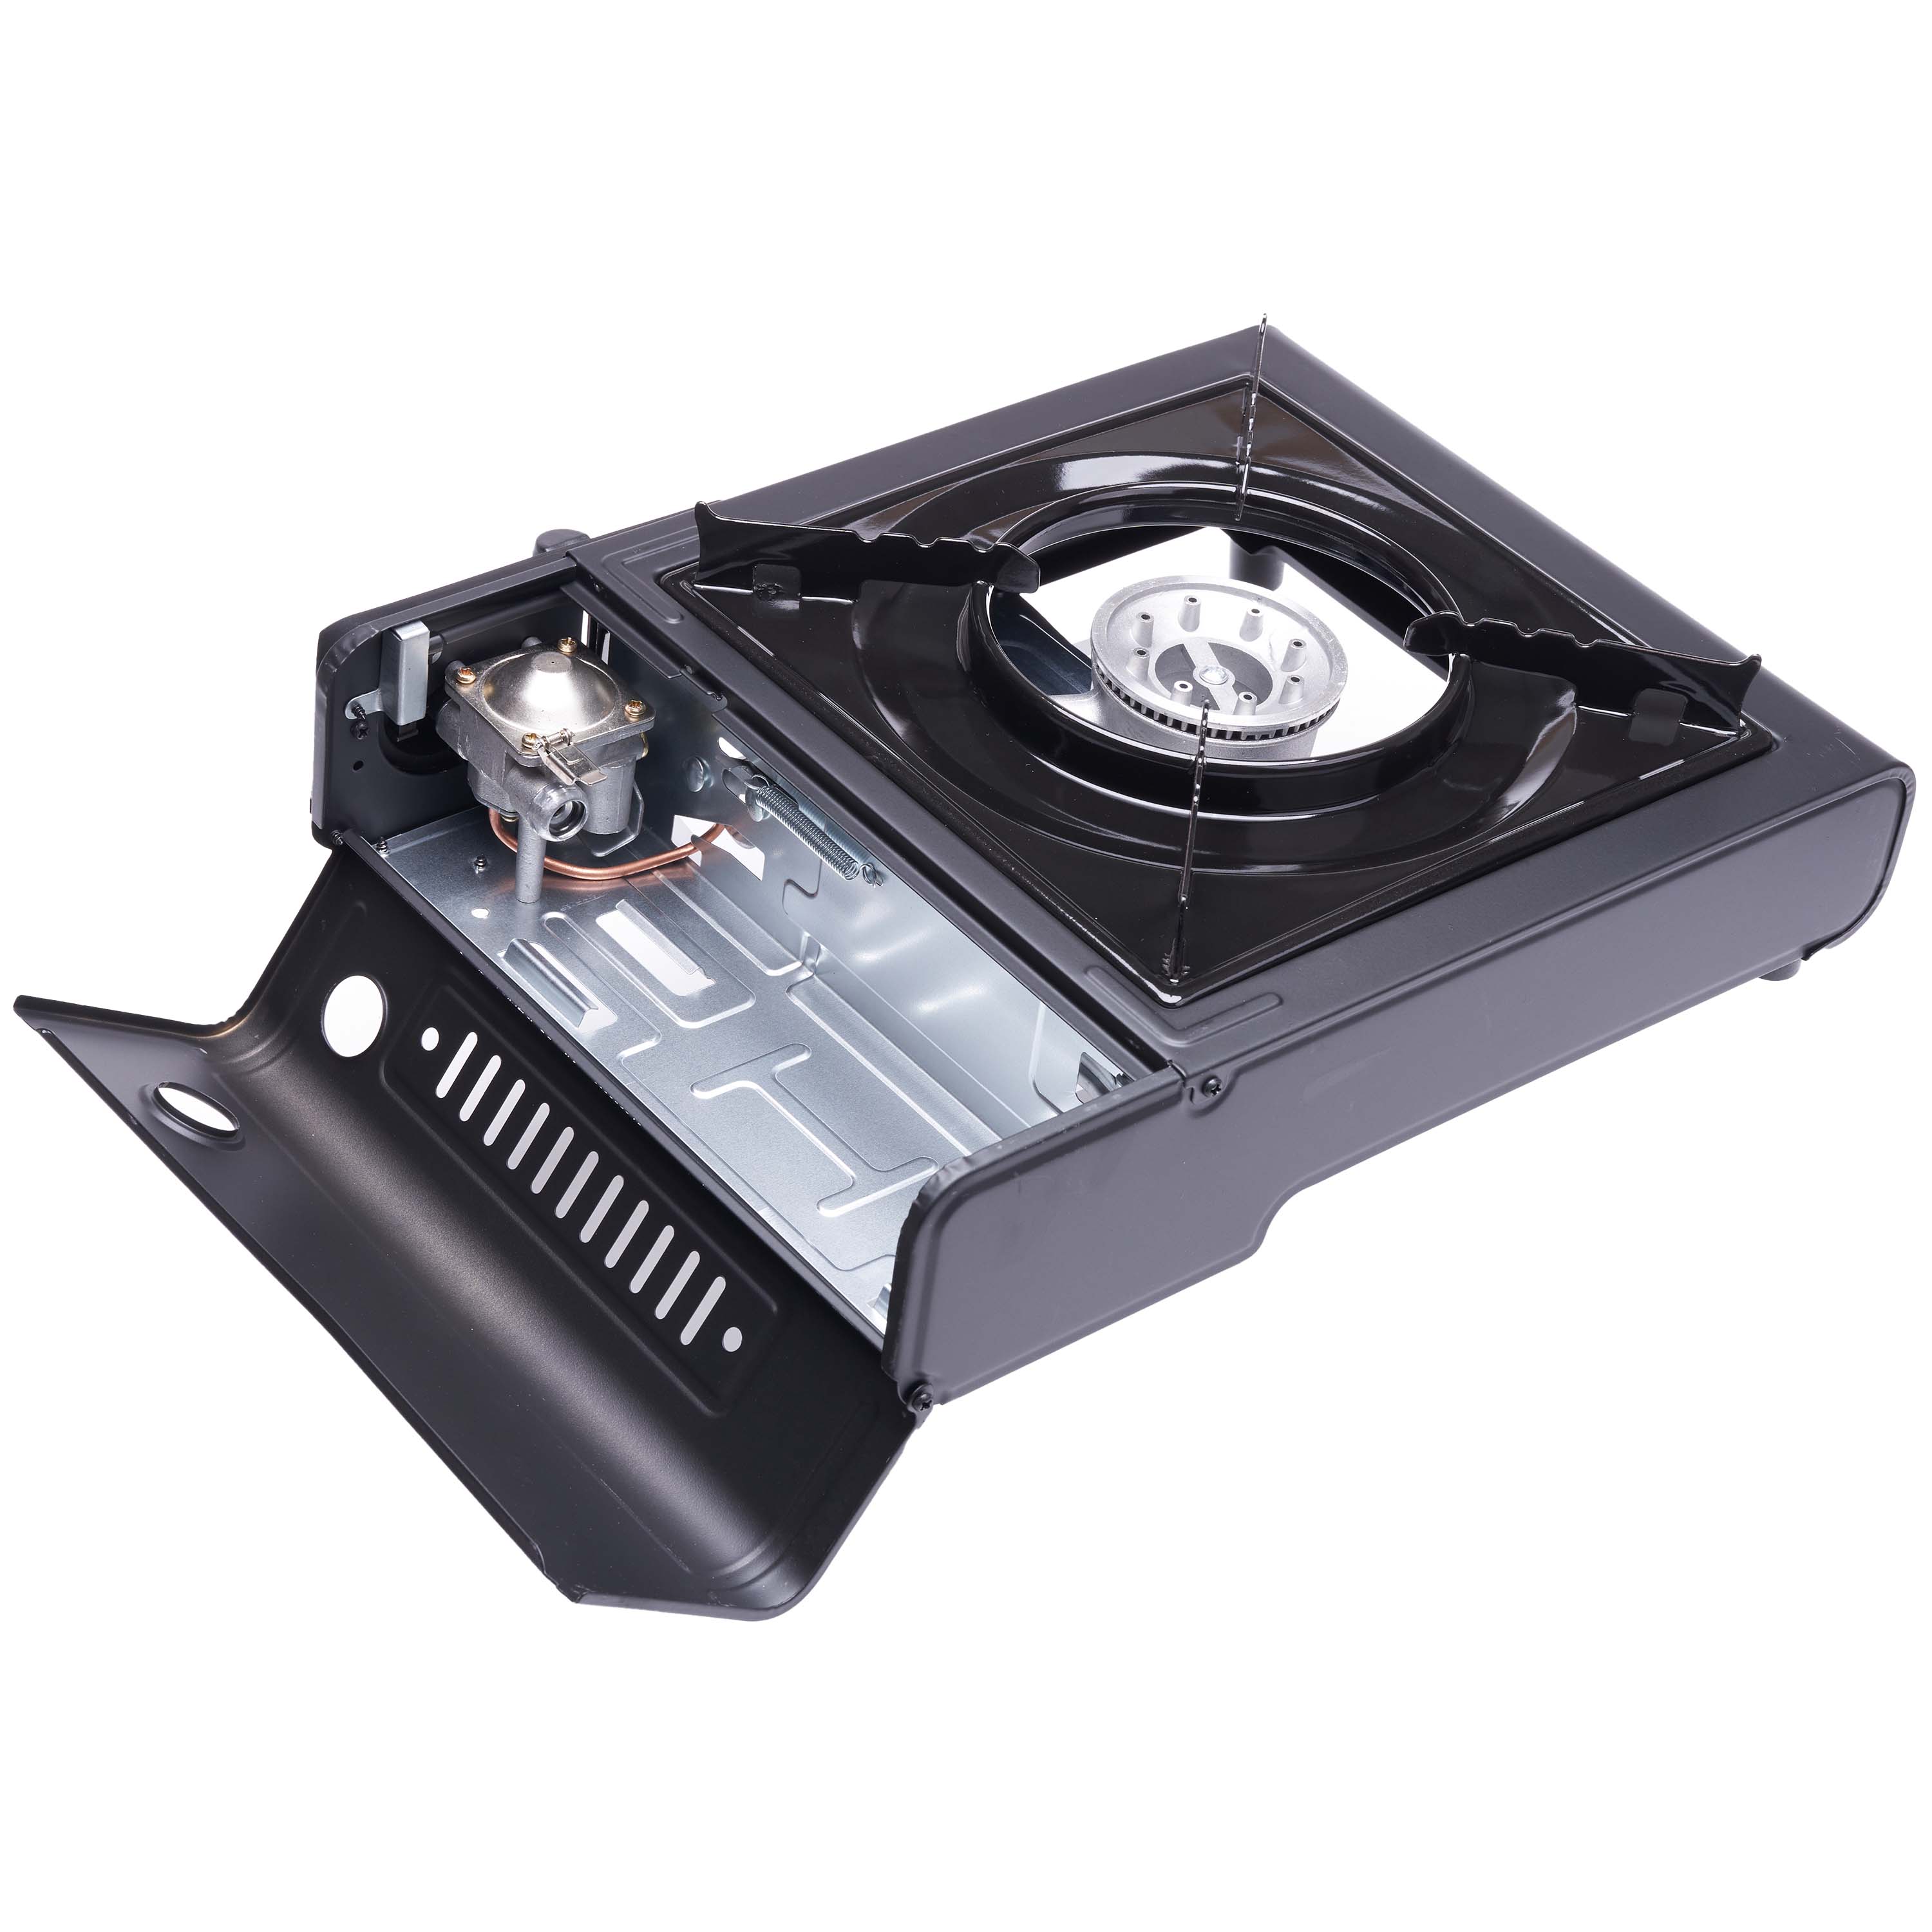 AMOS Eezy Pro Camping Stove